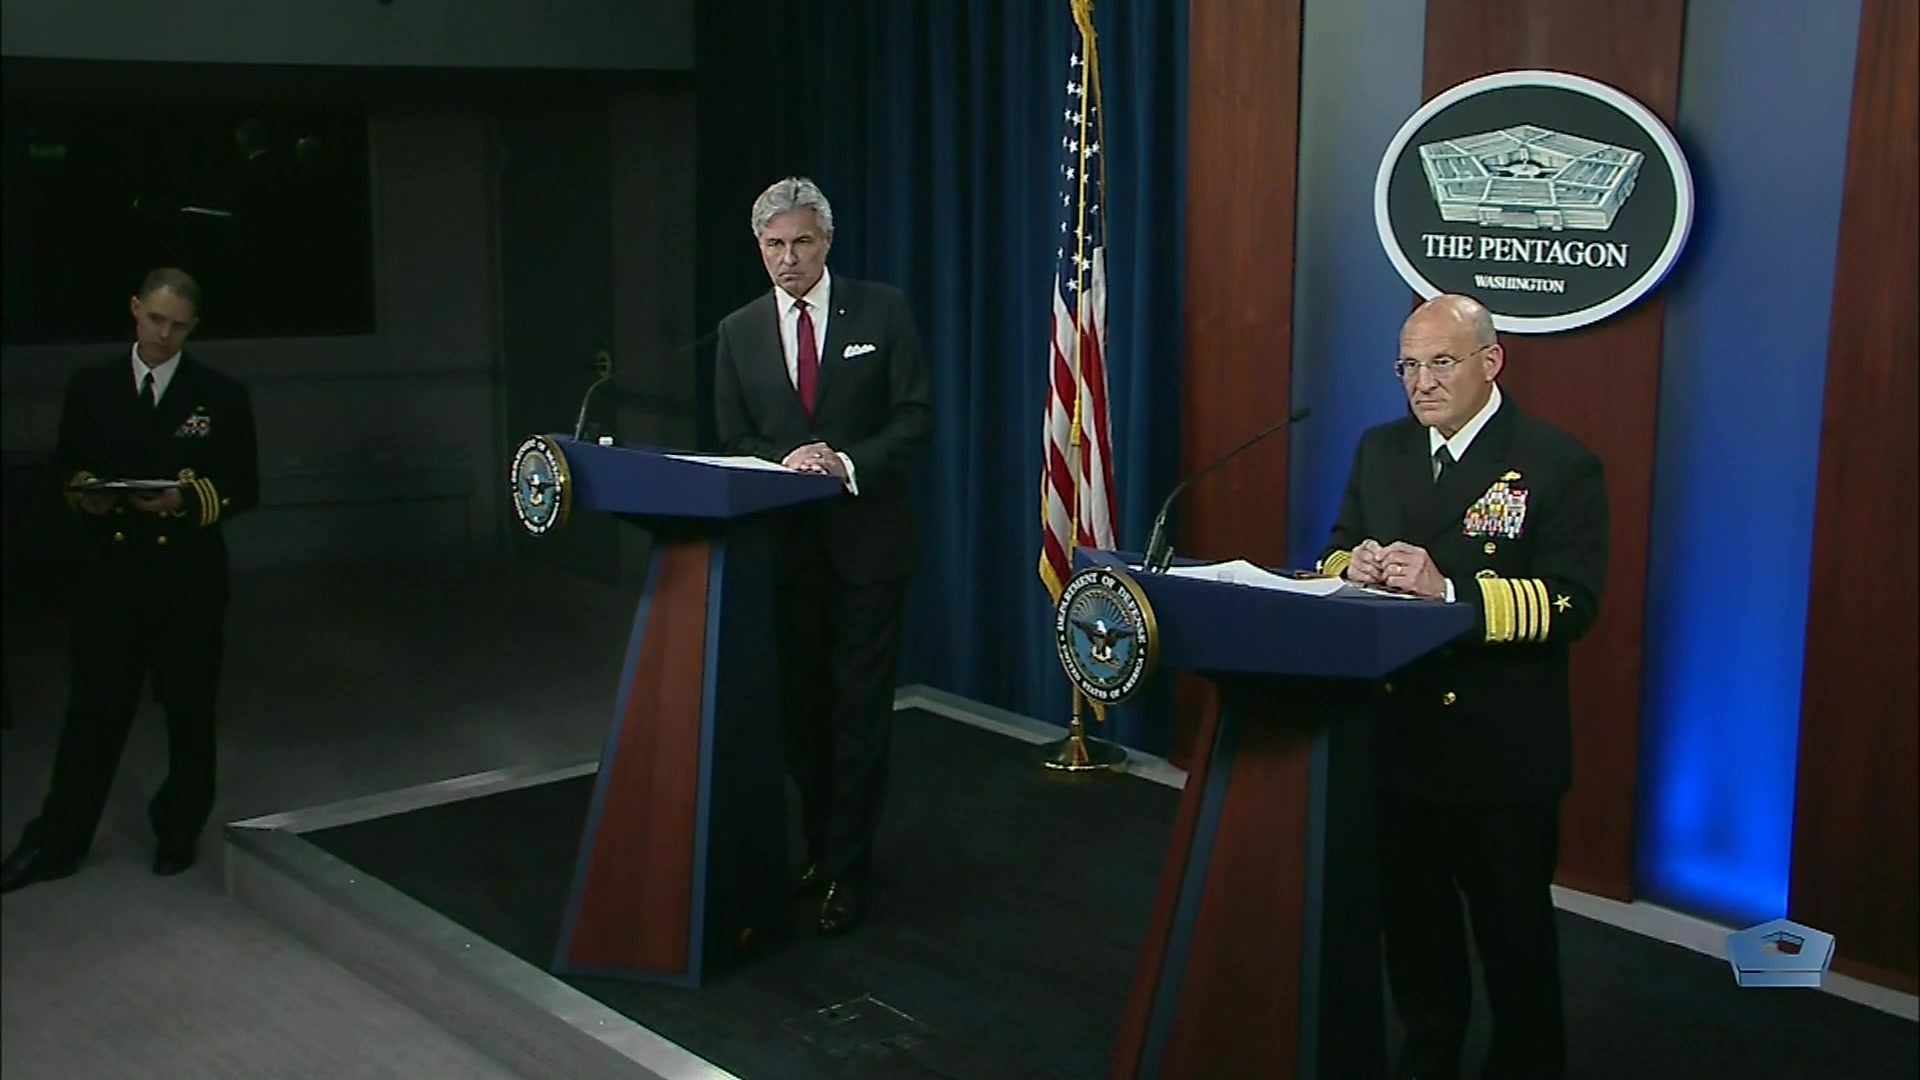 A civilian and a Navy admiral stand at lecterns.